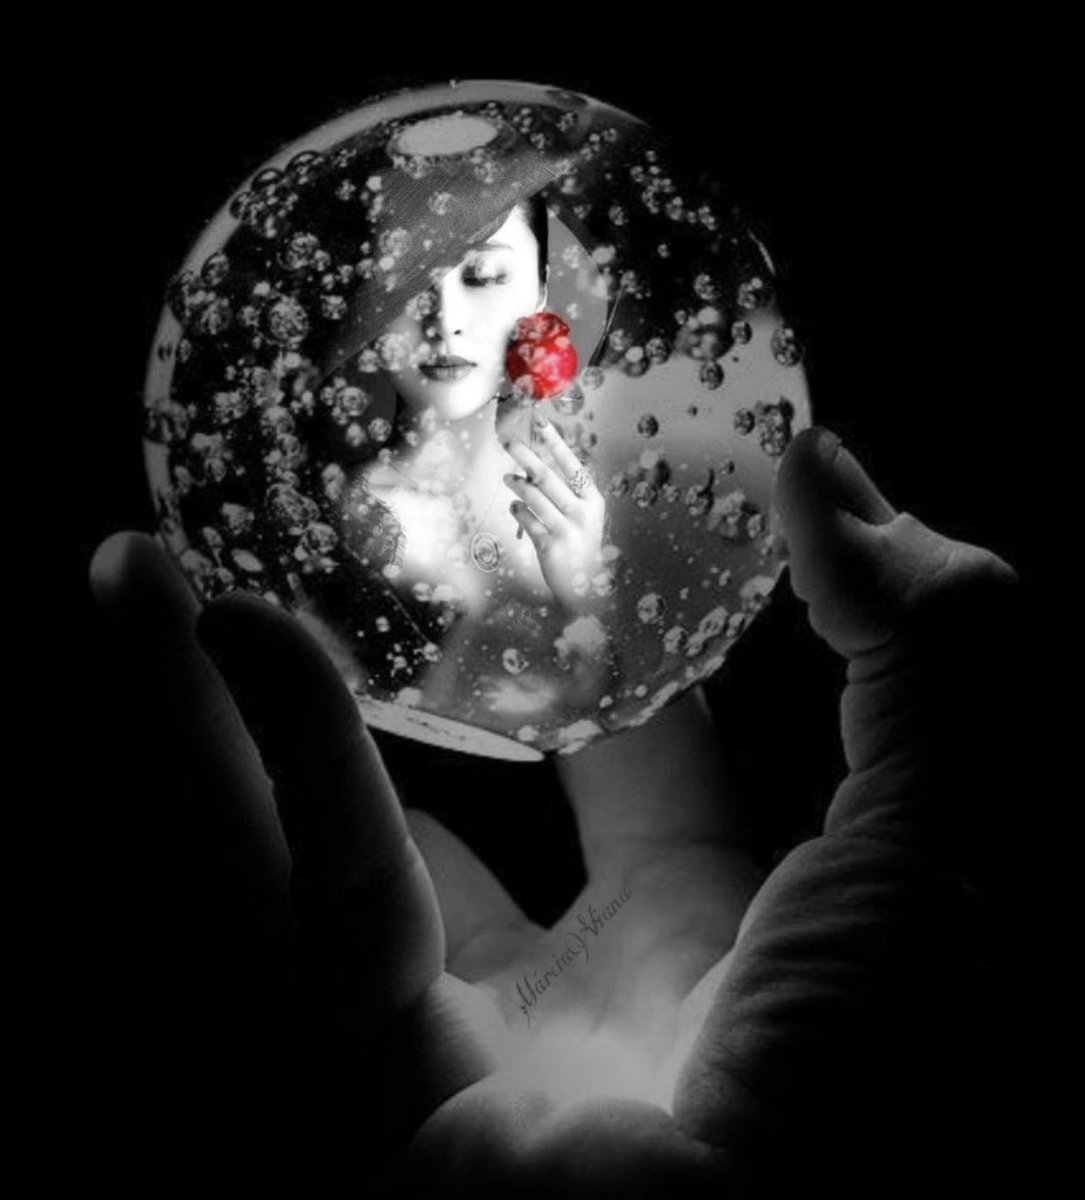 locked away safe, maybe frozen inside your quartz sphere perfect specimen of timeless beauty break me out, if you dare but do be careful, my dear for l'll eat your heart for dinner and use your bones to pinup my hair #macabrewords